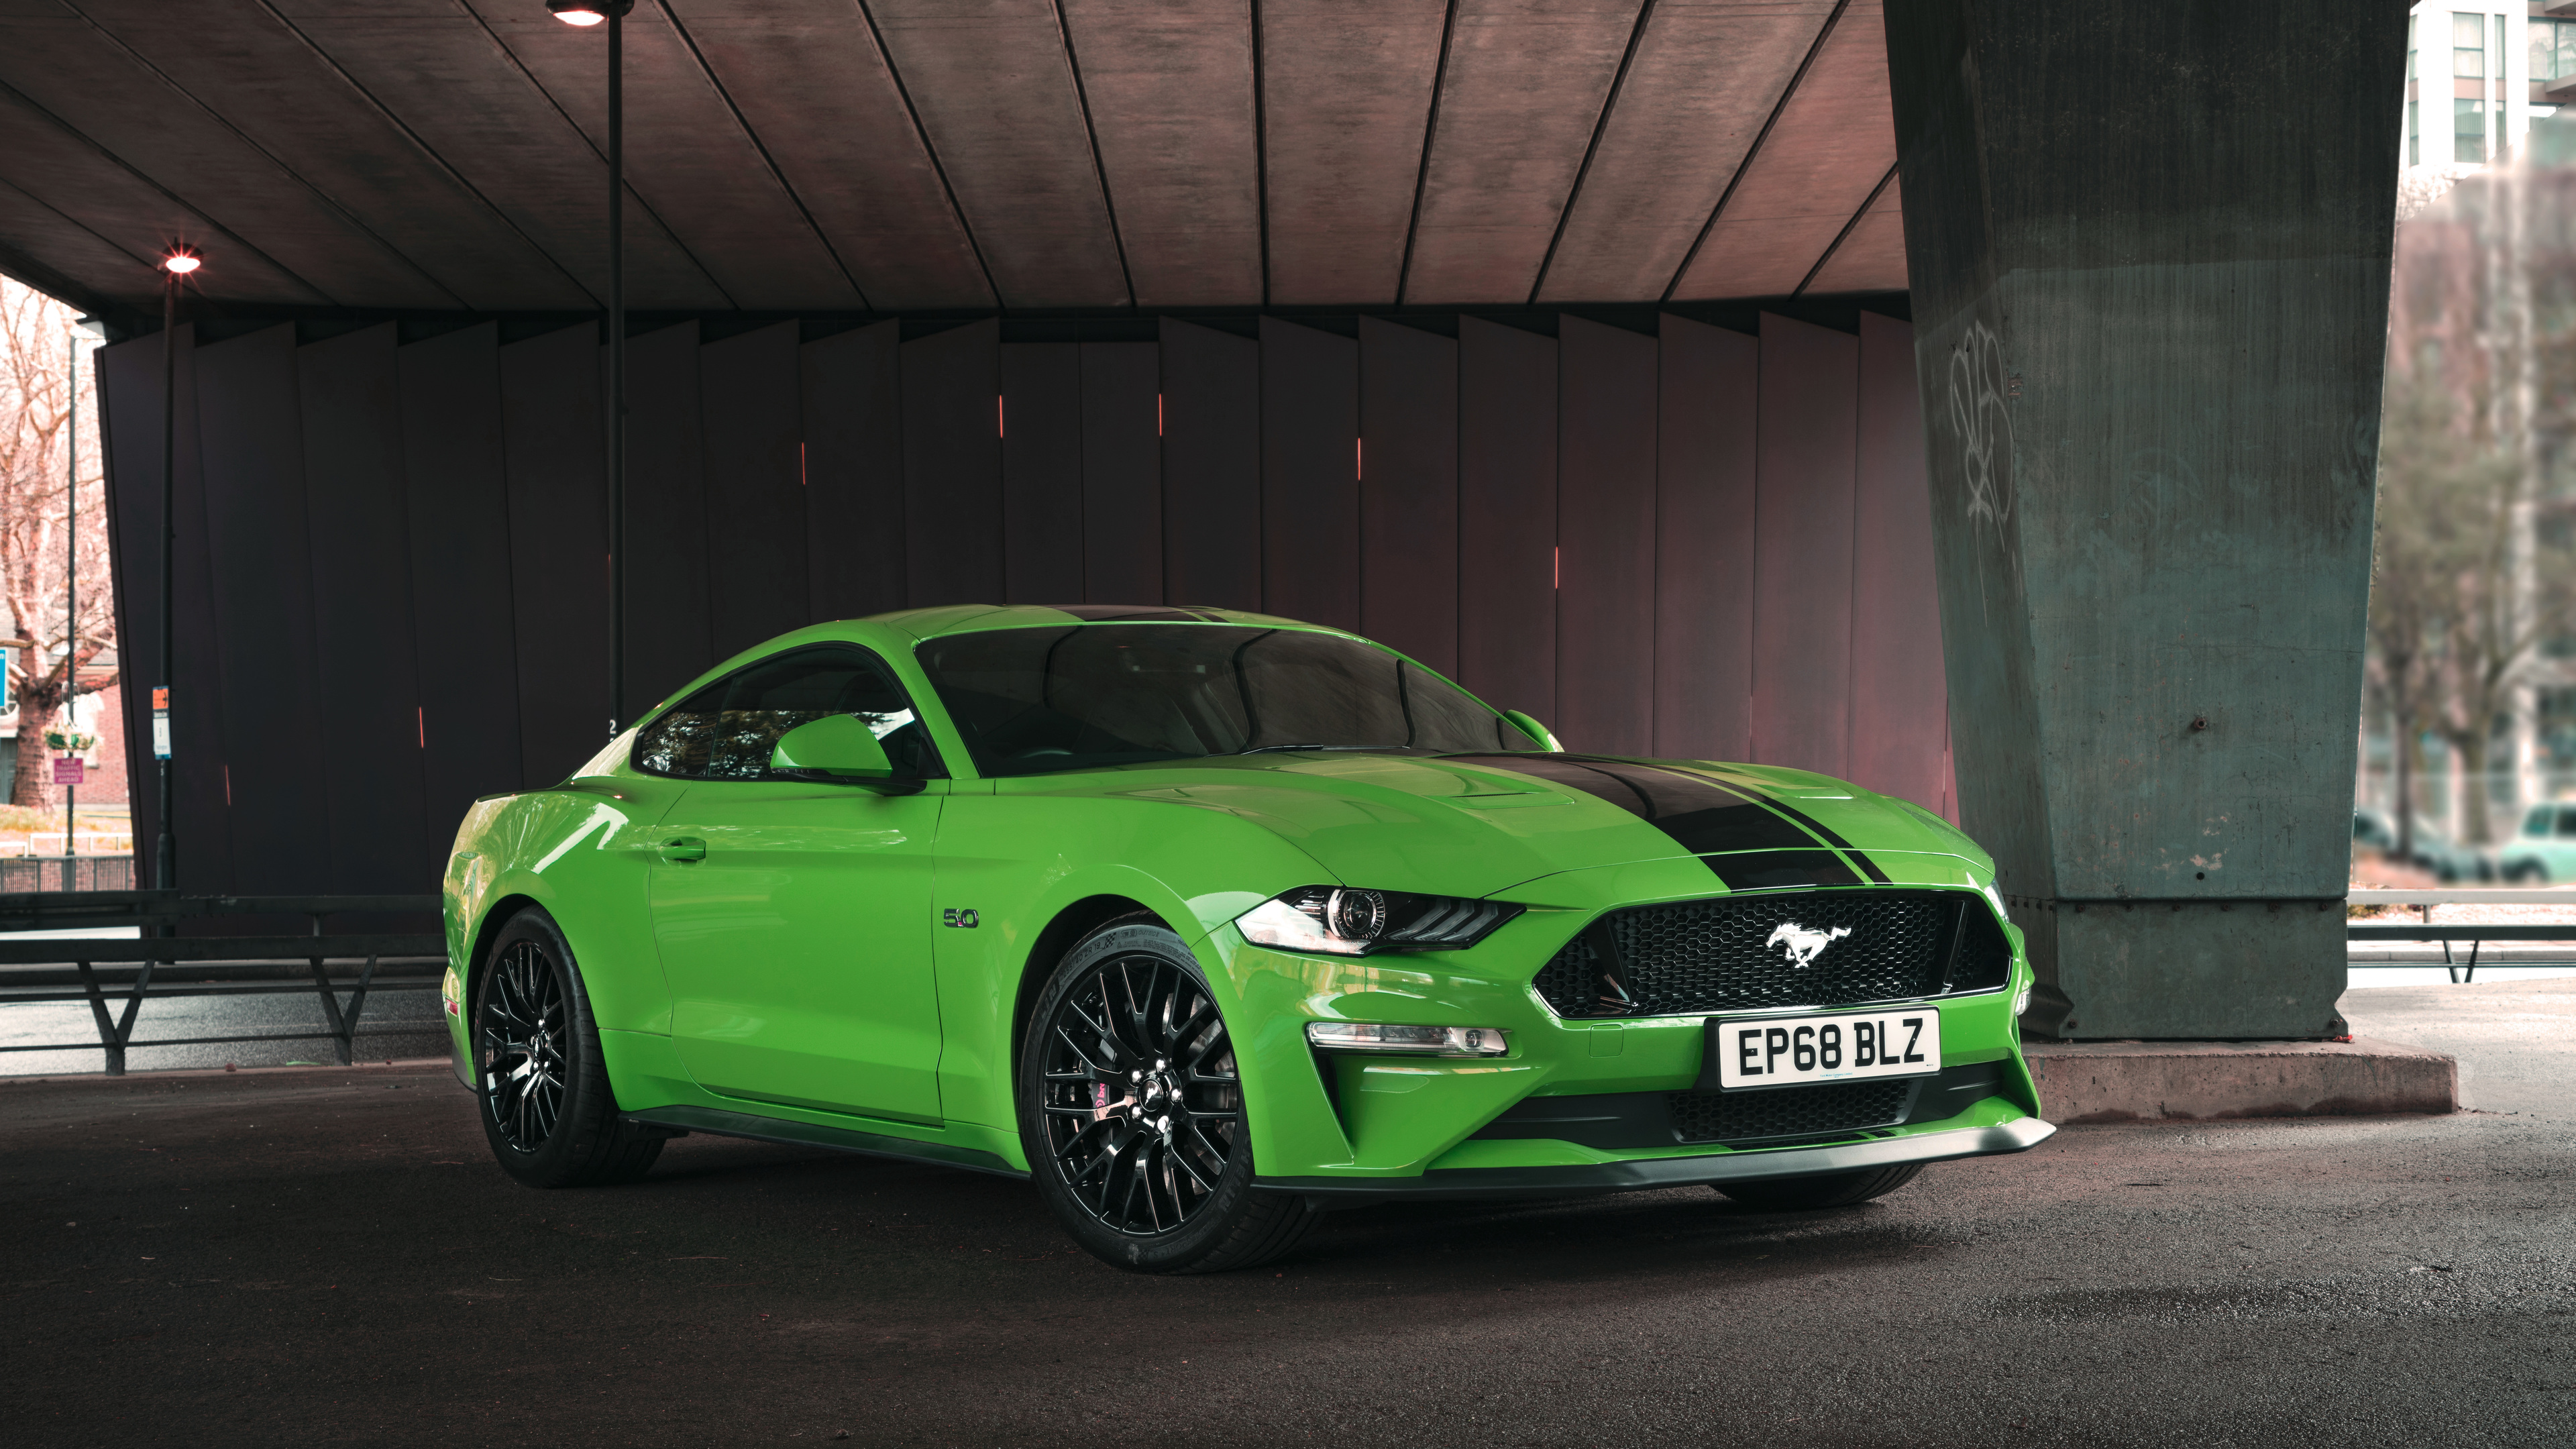 Green Ford Mustang Gt Fastback 2019 - Ford Mustang 2019 Hd - HD Wallpaper 